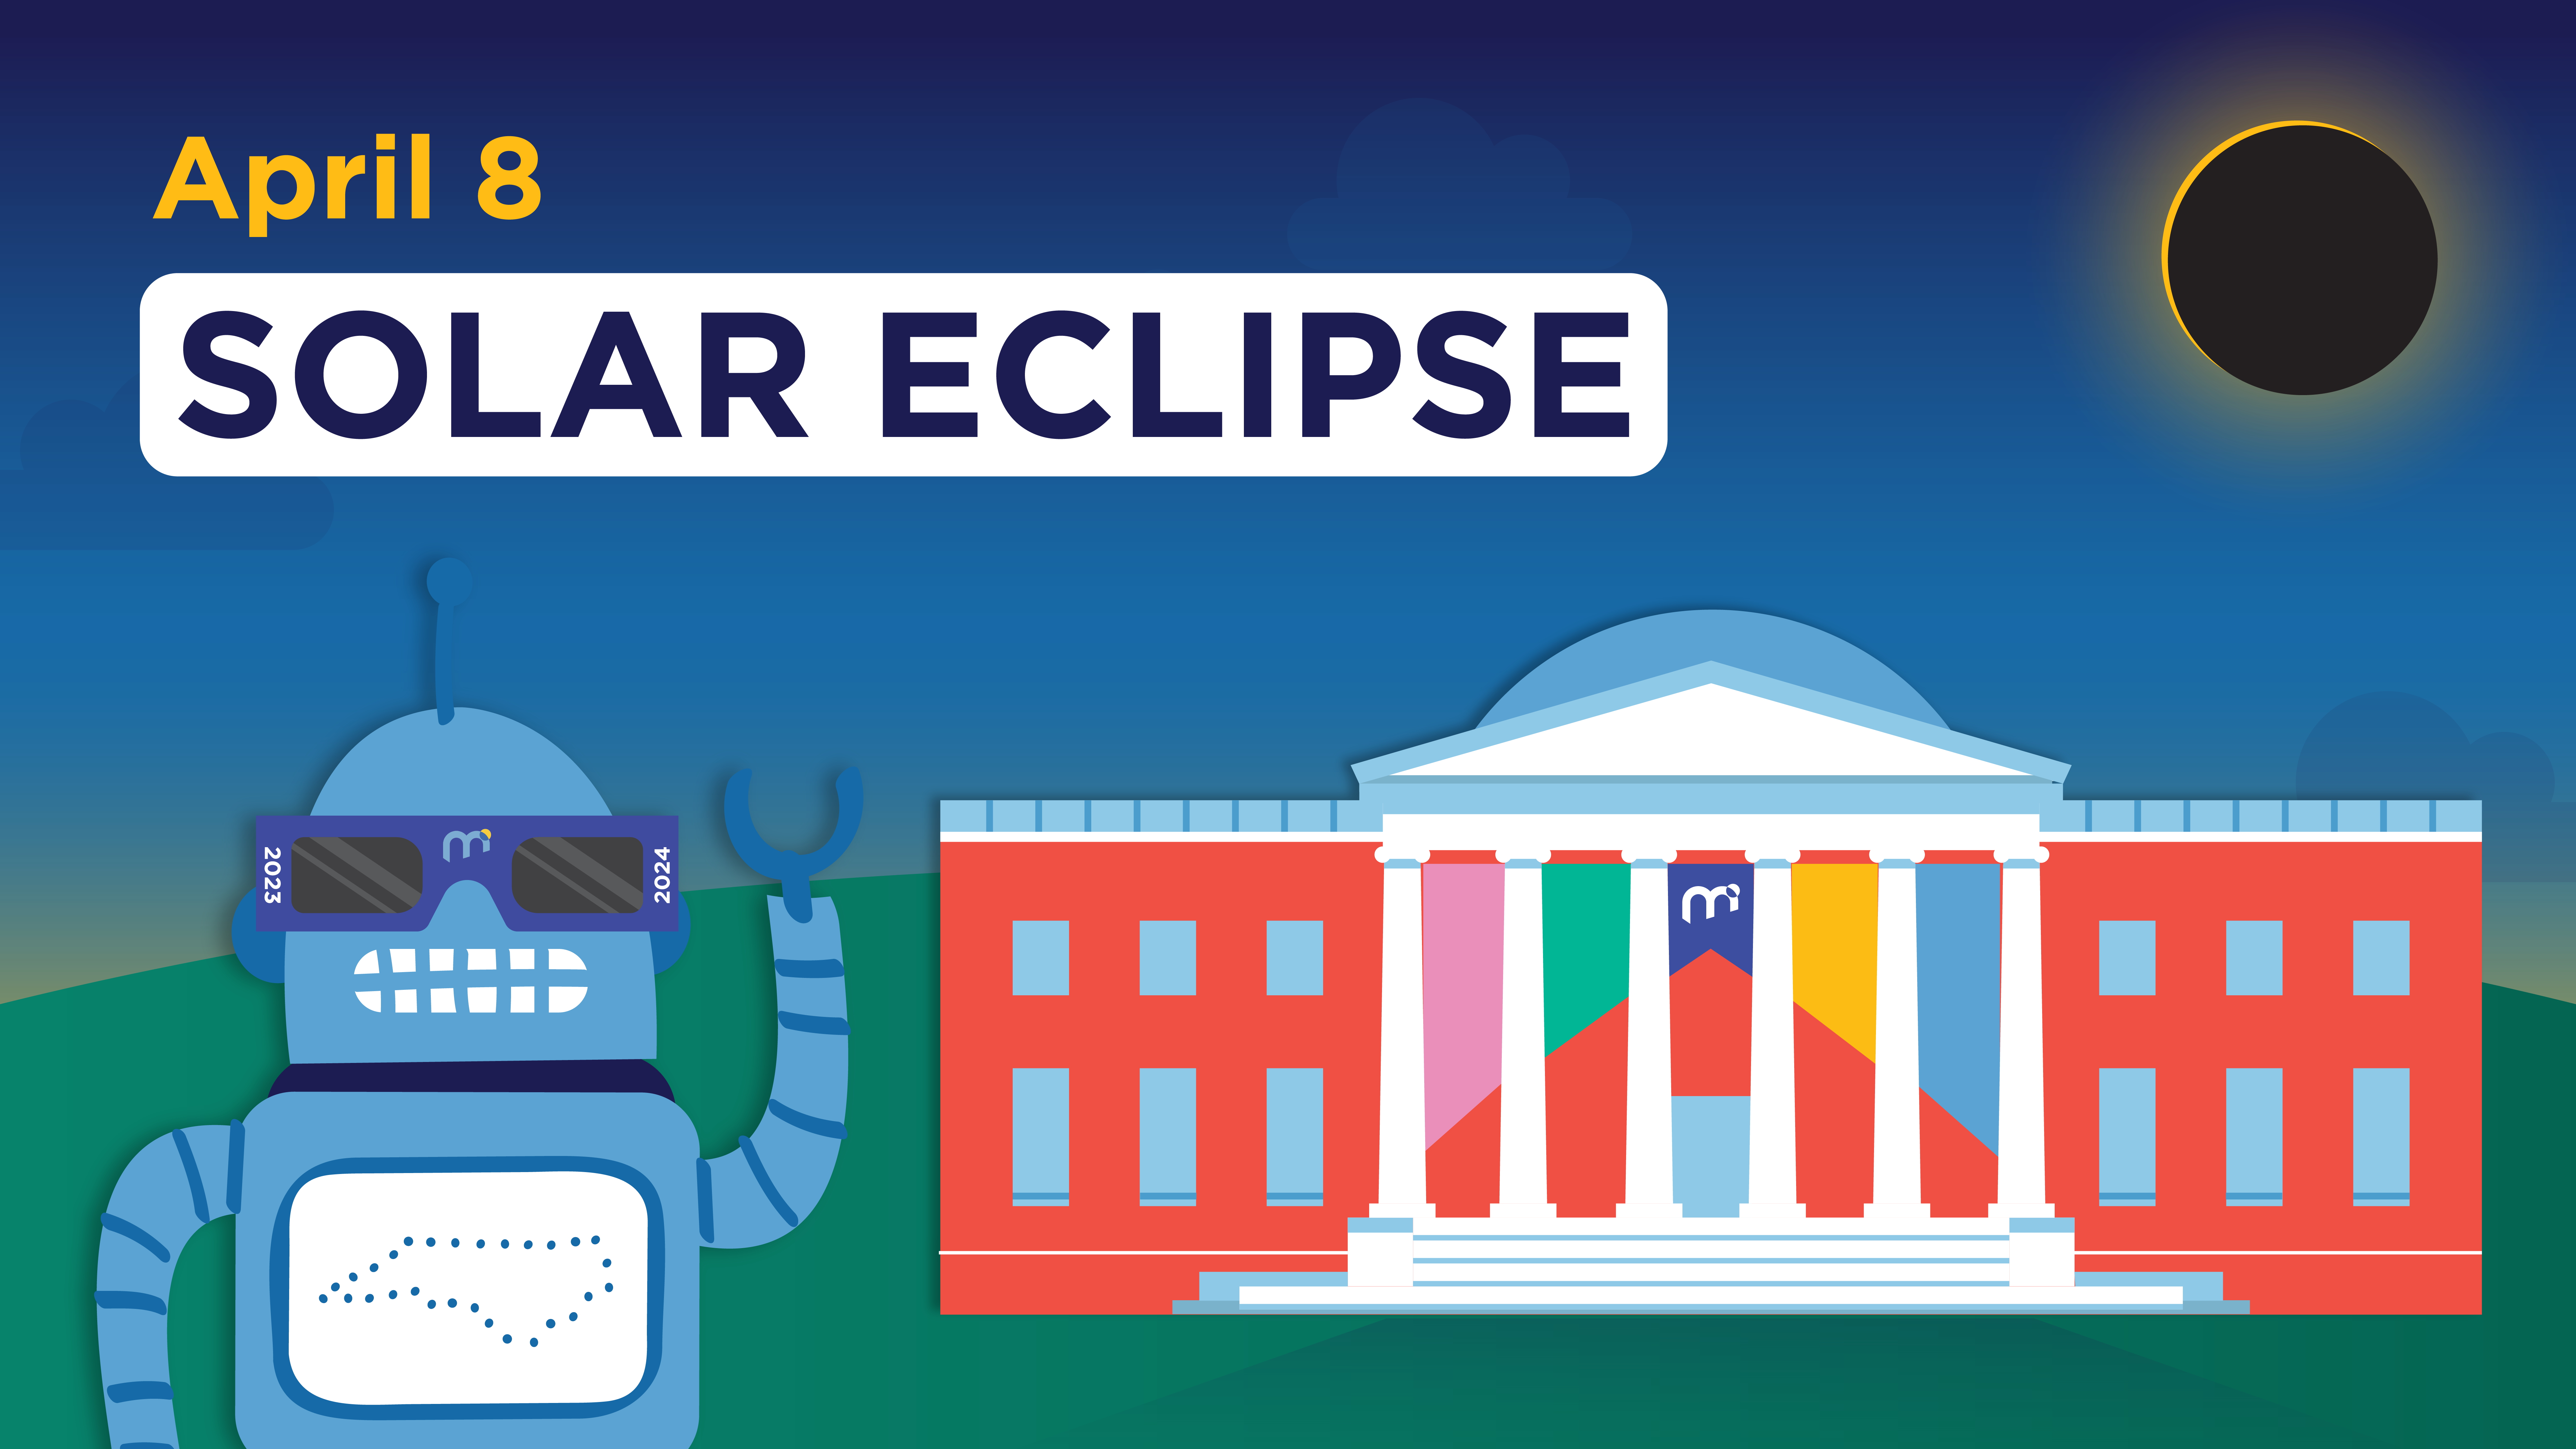 A vector illustration of Kelvin, the North Carolina Science Festival spokesbot, wearing a pair of eclipse glasses. In the background is the Morehead building and the eclipse. The text says, "April 8: Solar Eclipse."